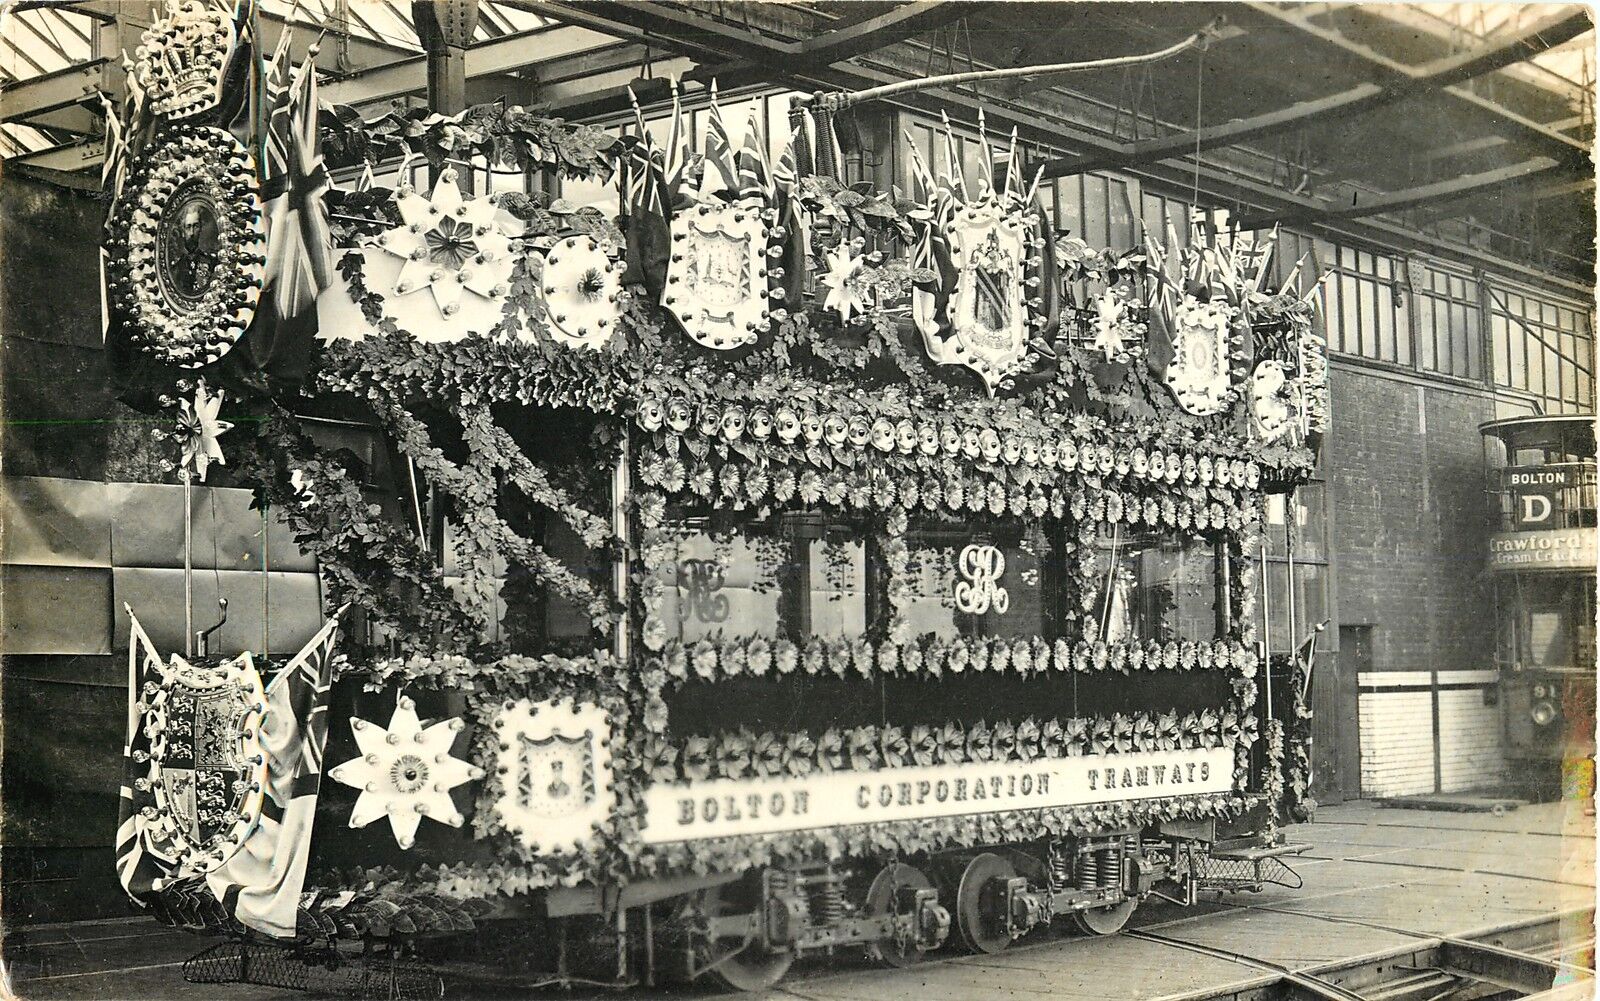 Decorated Trolley Car, Bolton Corporation Tramways, Bolton Manchester UK RPPC